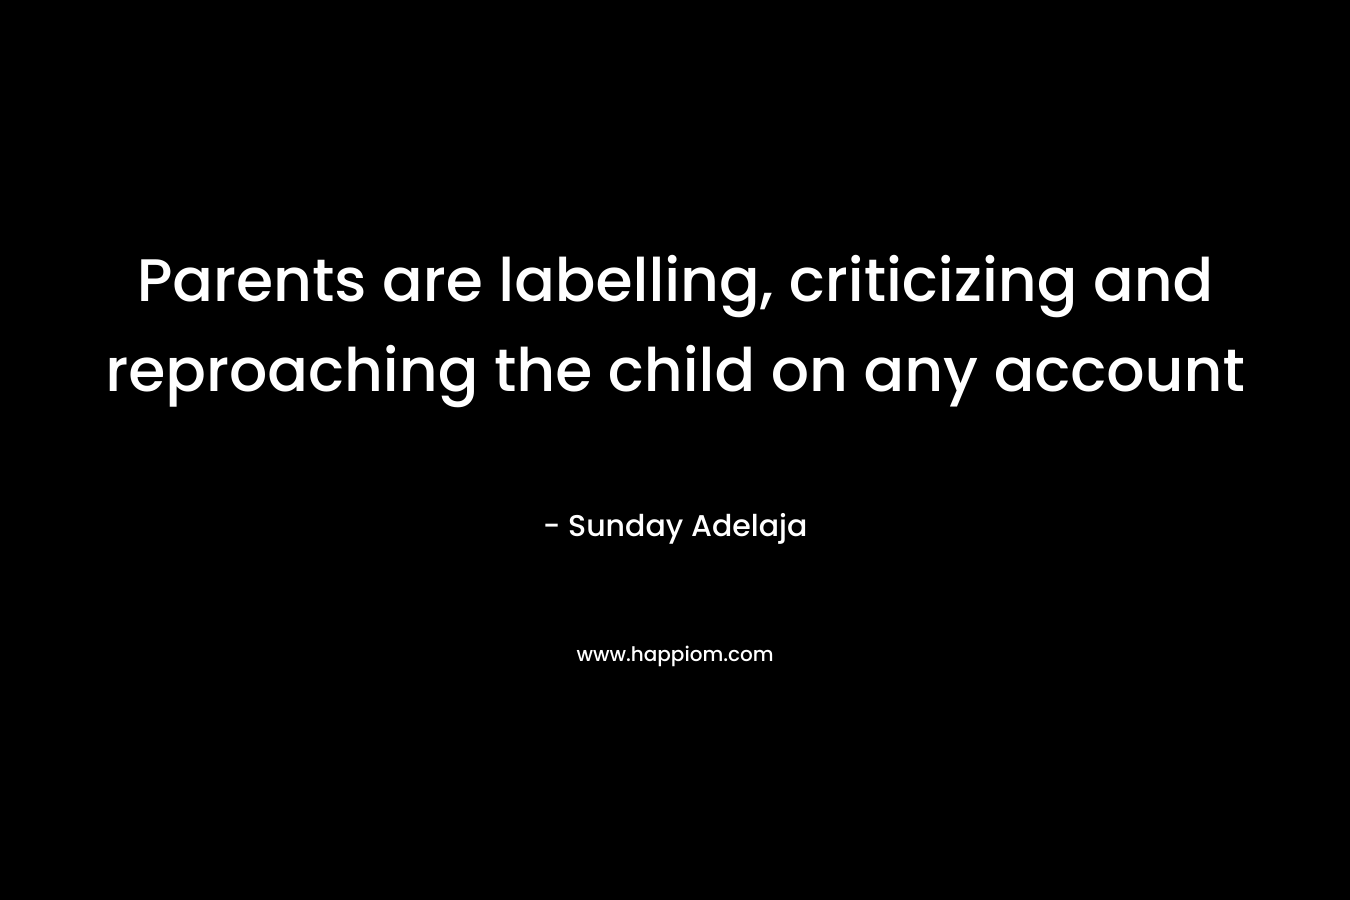 Parents are labelling, criticizing and reproaching the child on any account